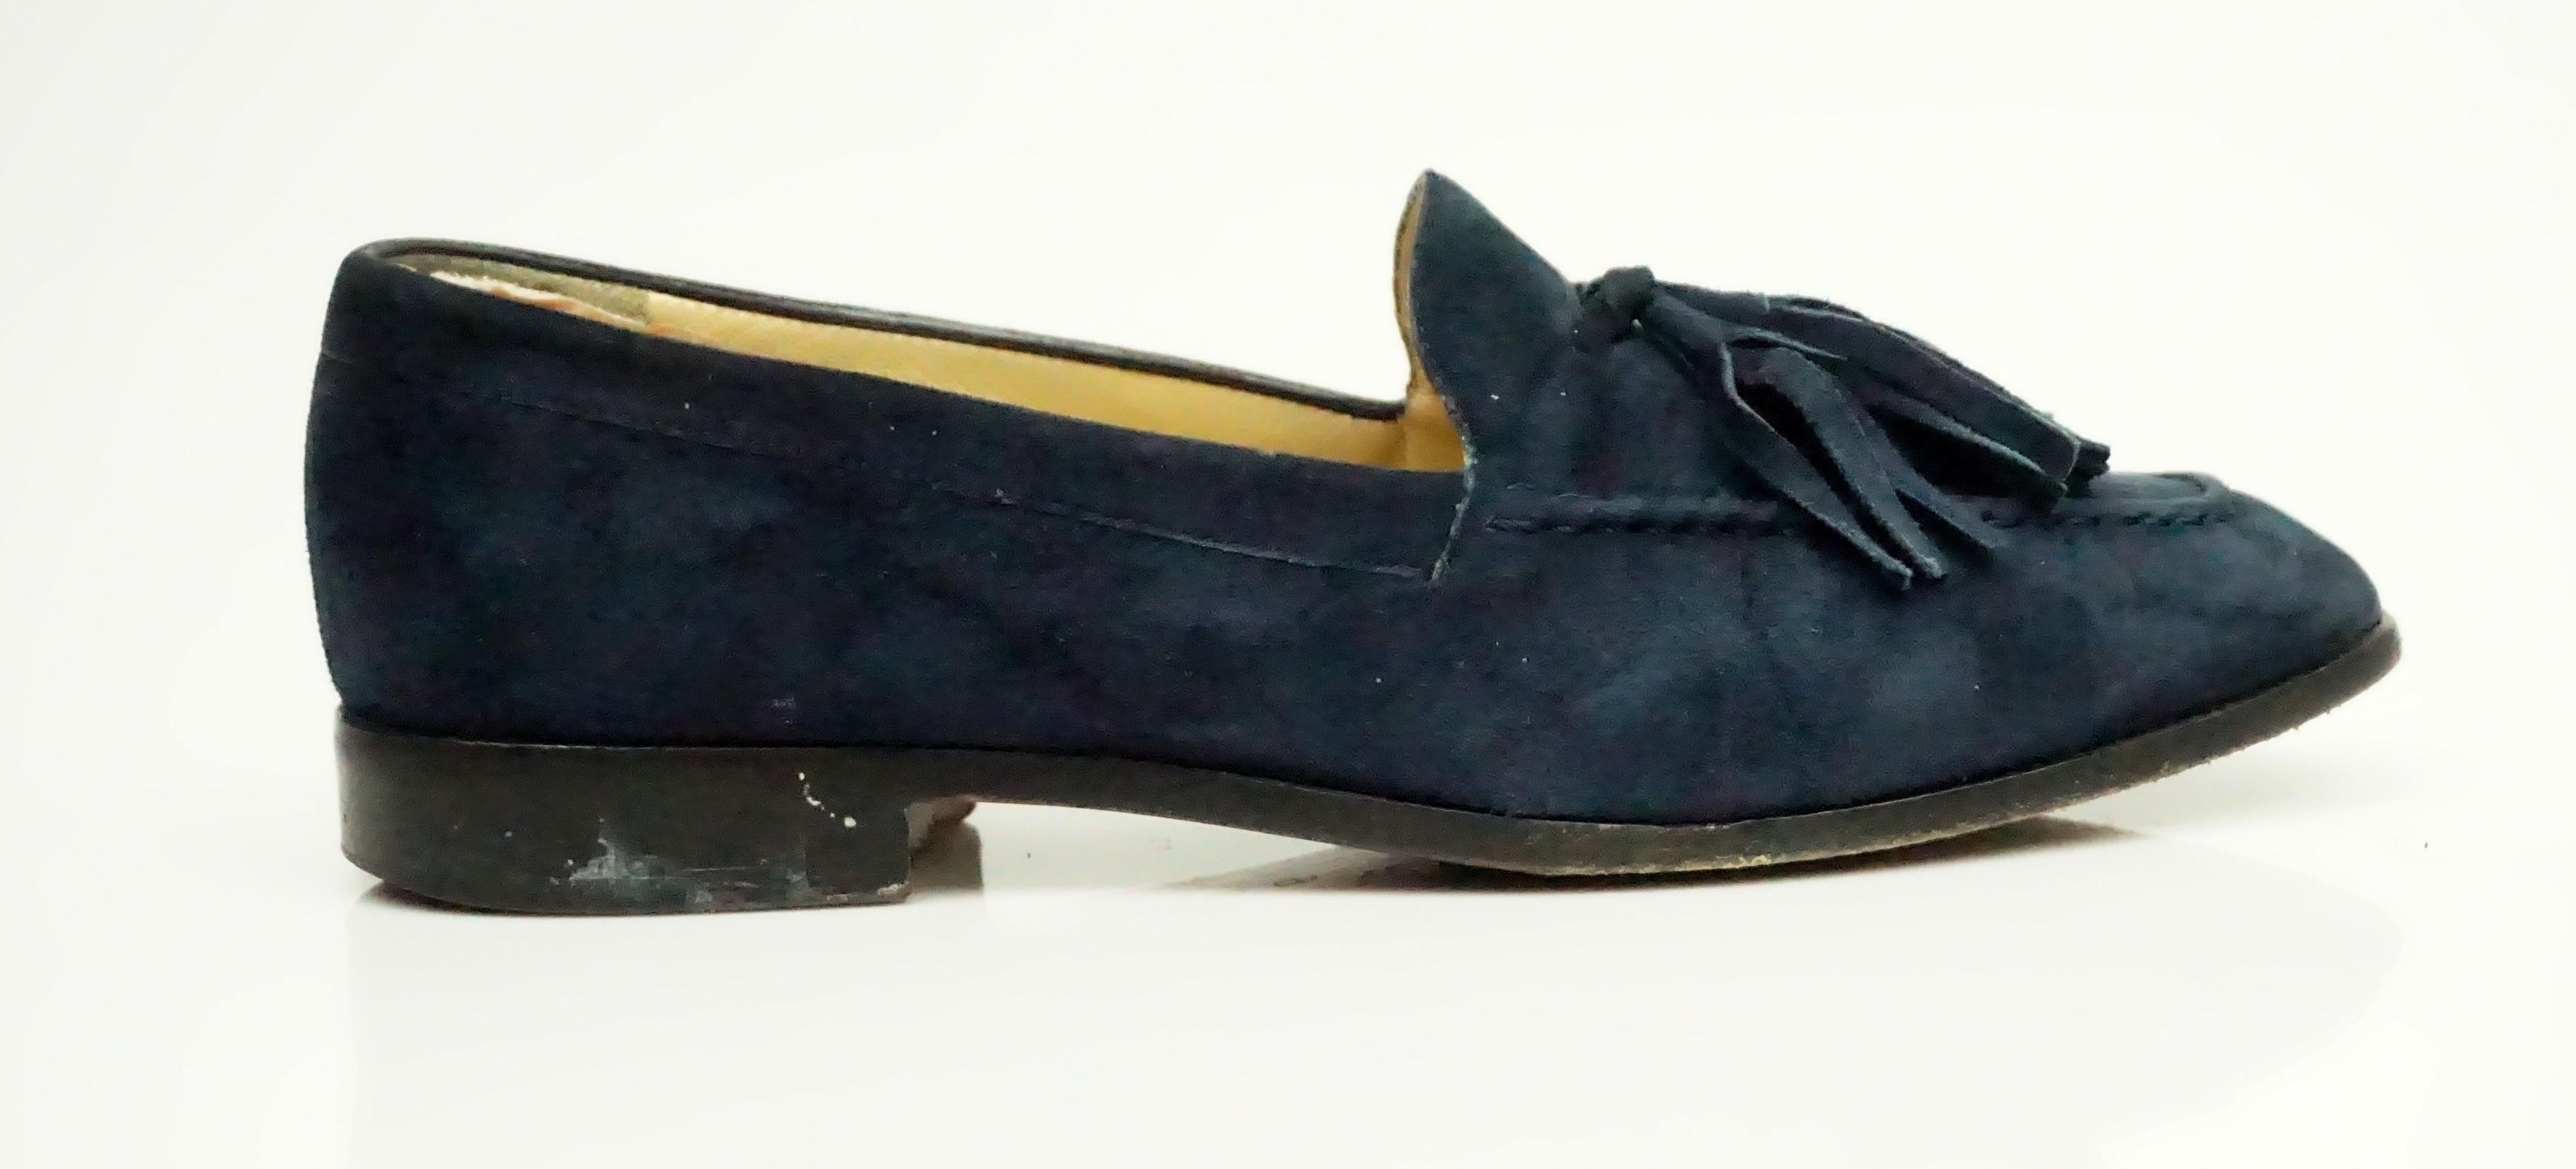 Gucci Vintage Navy Suede Tassel Loafer - 6  These beautiful loafers are in good condition. They are completely covered in suede and have a suede tassel detail in the front. The bottom of the shoe has some wear and the shoe itself has a bit of wear